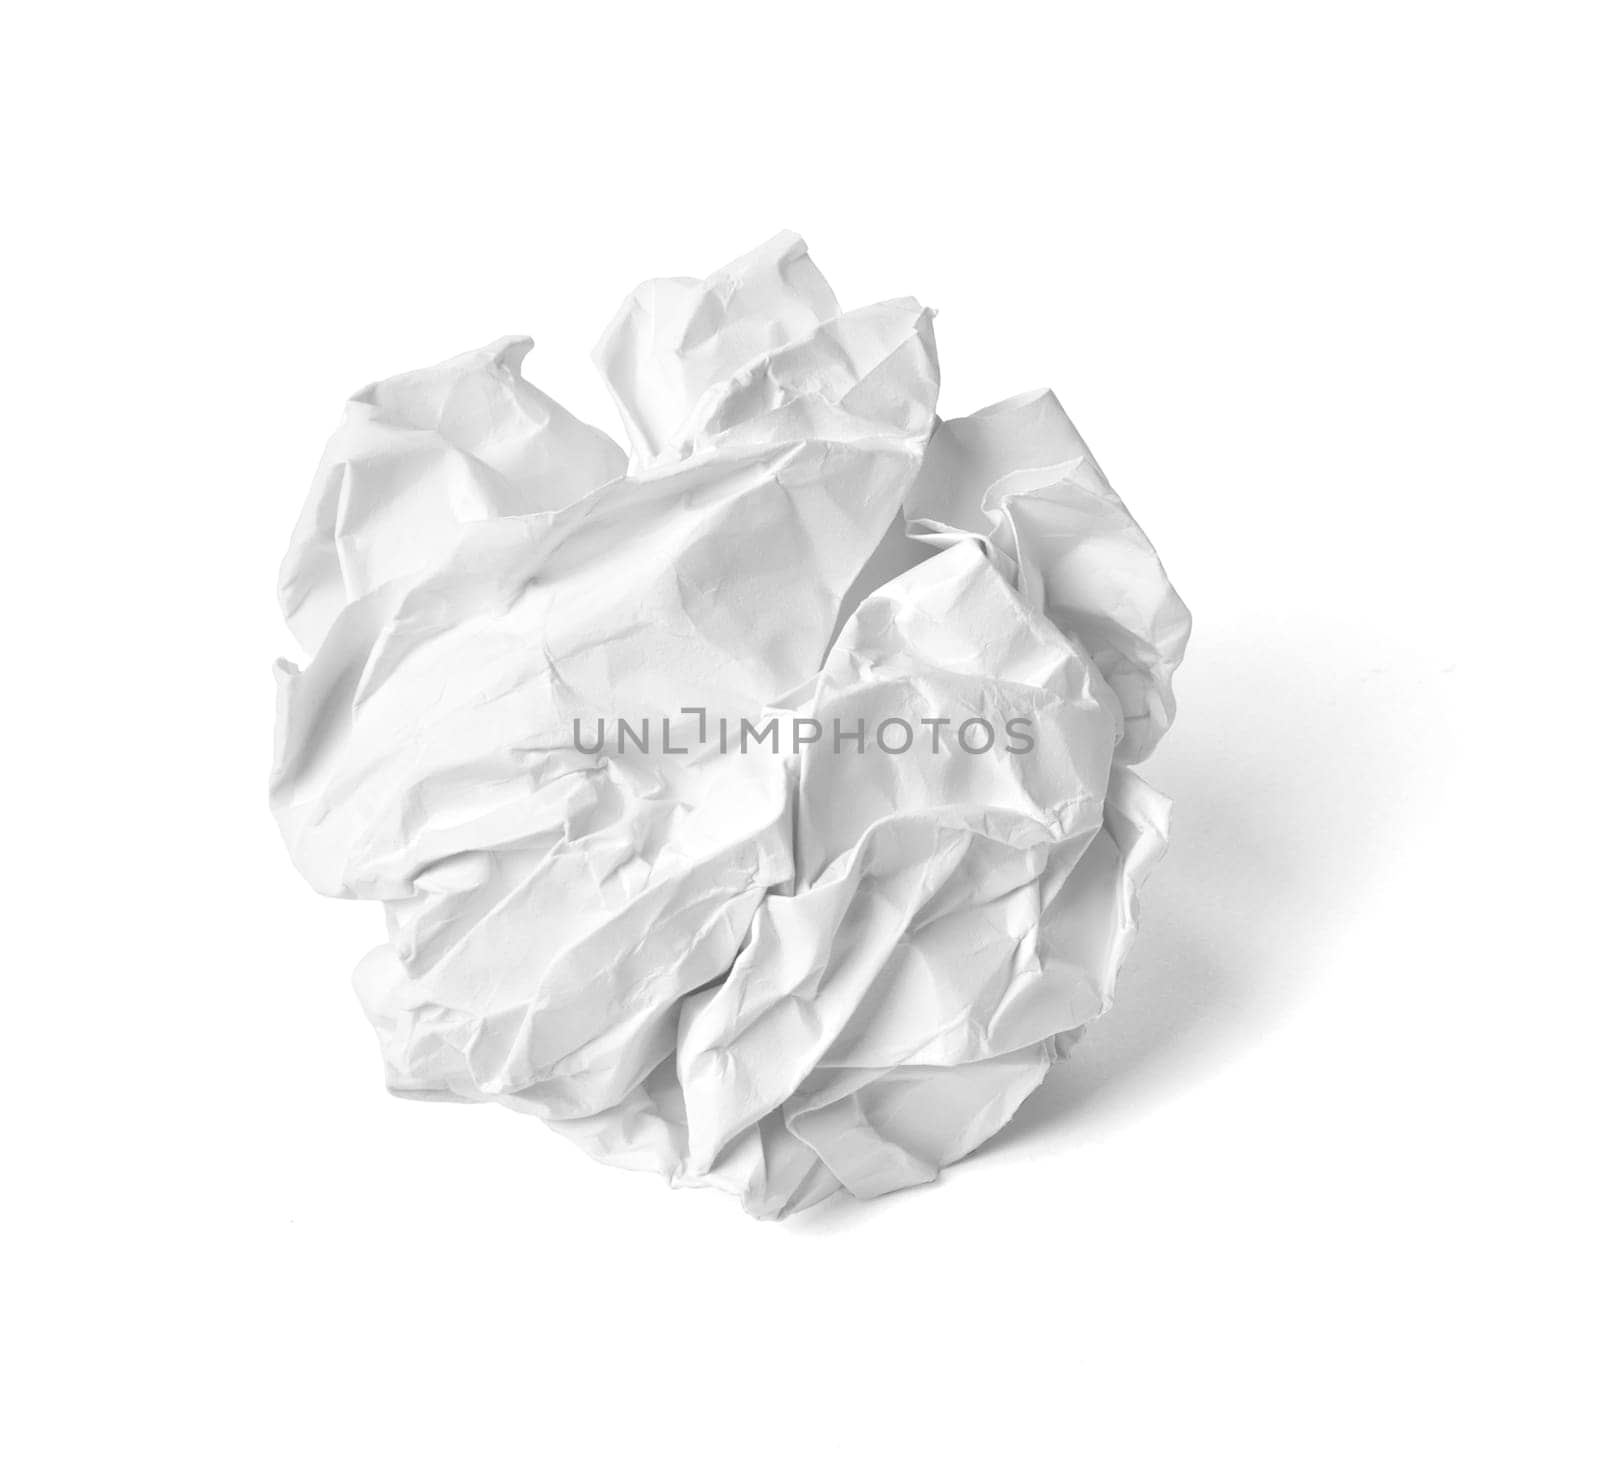 close up of a paper ball trash on white background